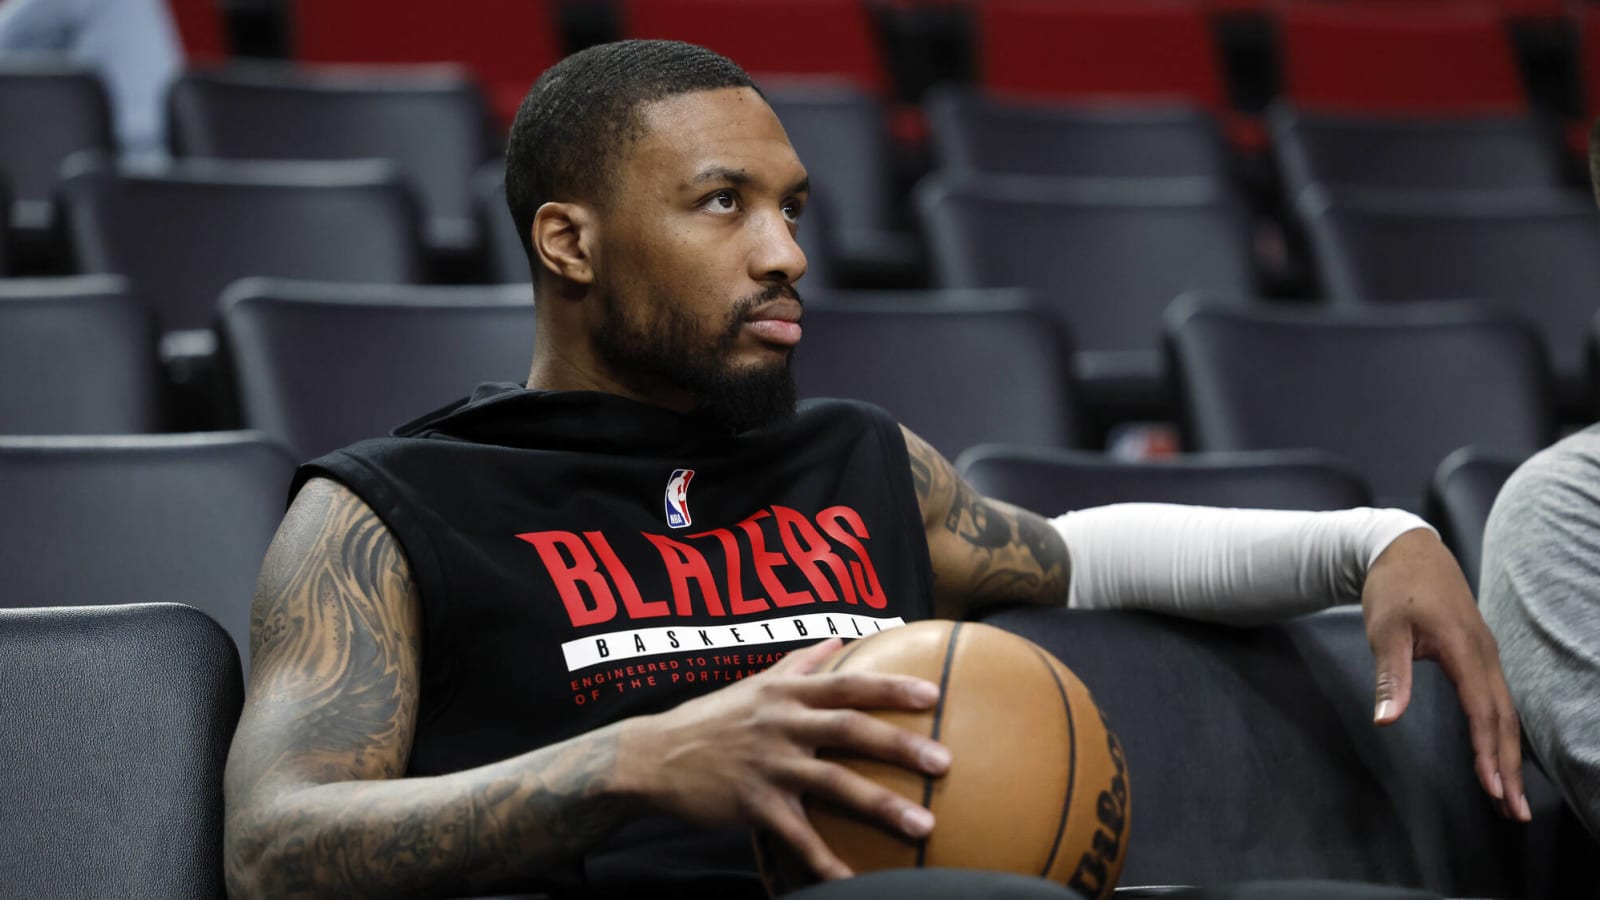 Damian Lillard's agent ‘warning’ teams not to trade for him